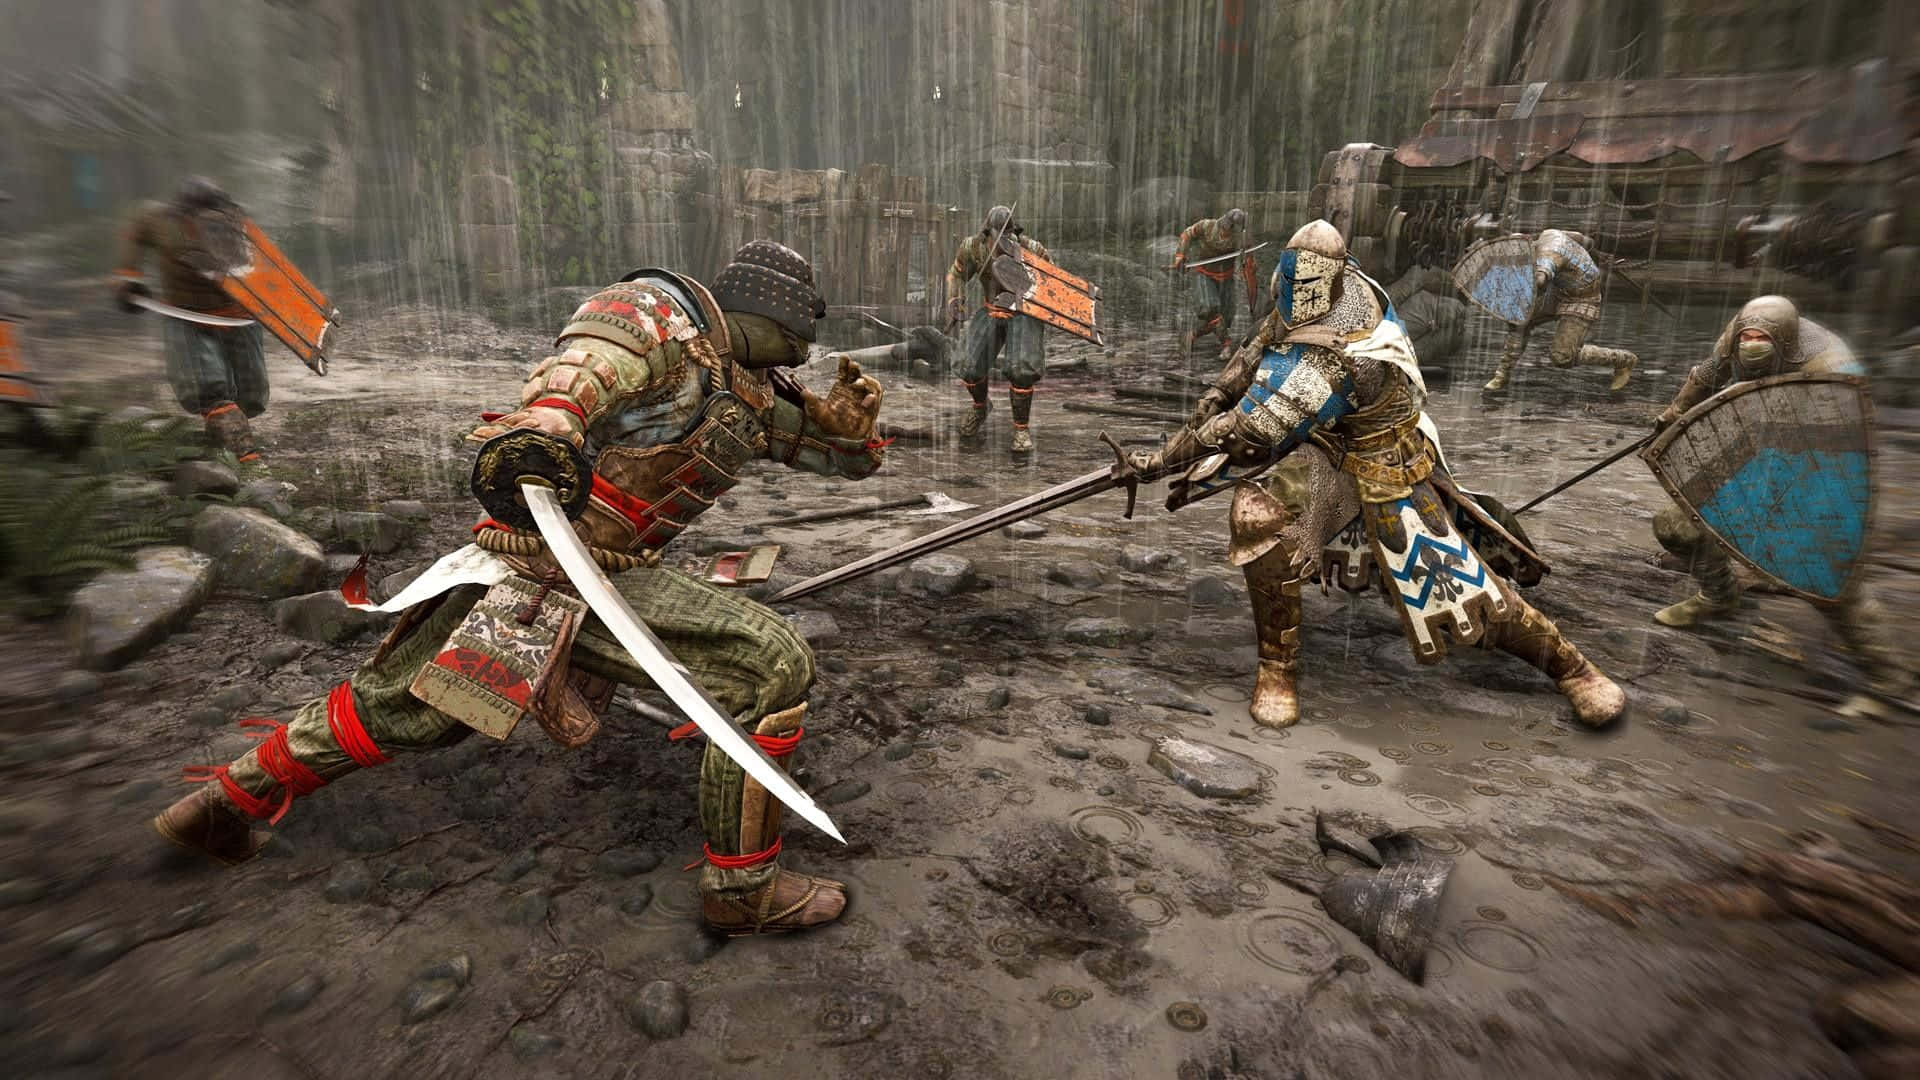 For Honor Battle Scene with Warriors and Warriors in an Epic Face-Off